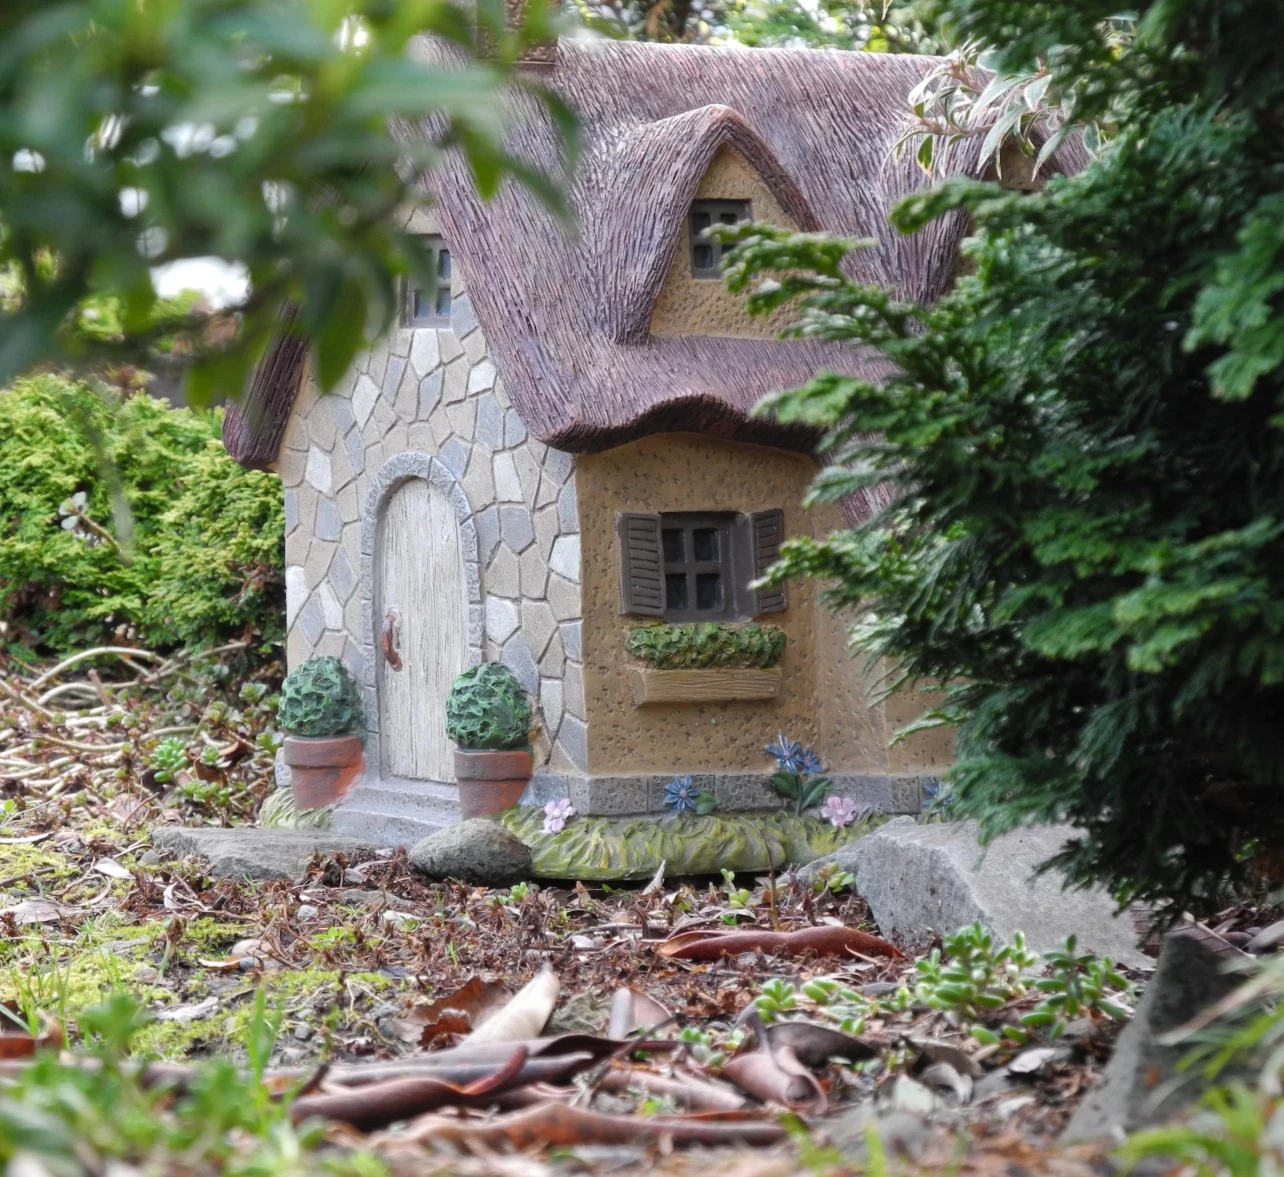 house-shaped garden decoration, made from ceramic or moulding clay, placed on a forest floor, diy fairy house, near green shrubs and branches